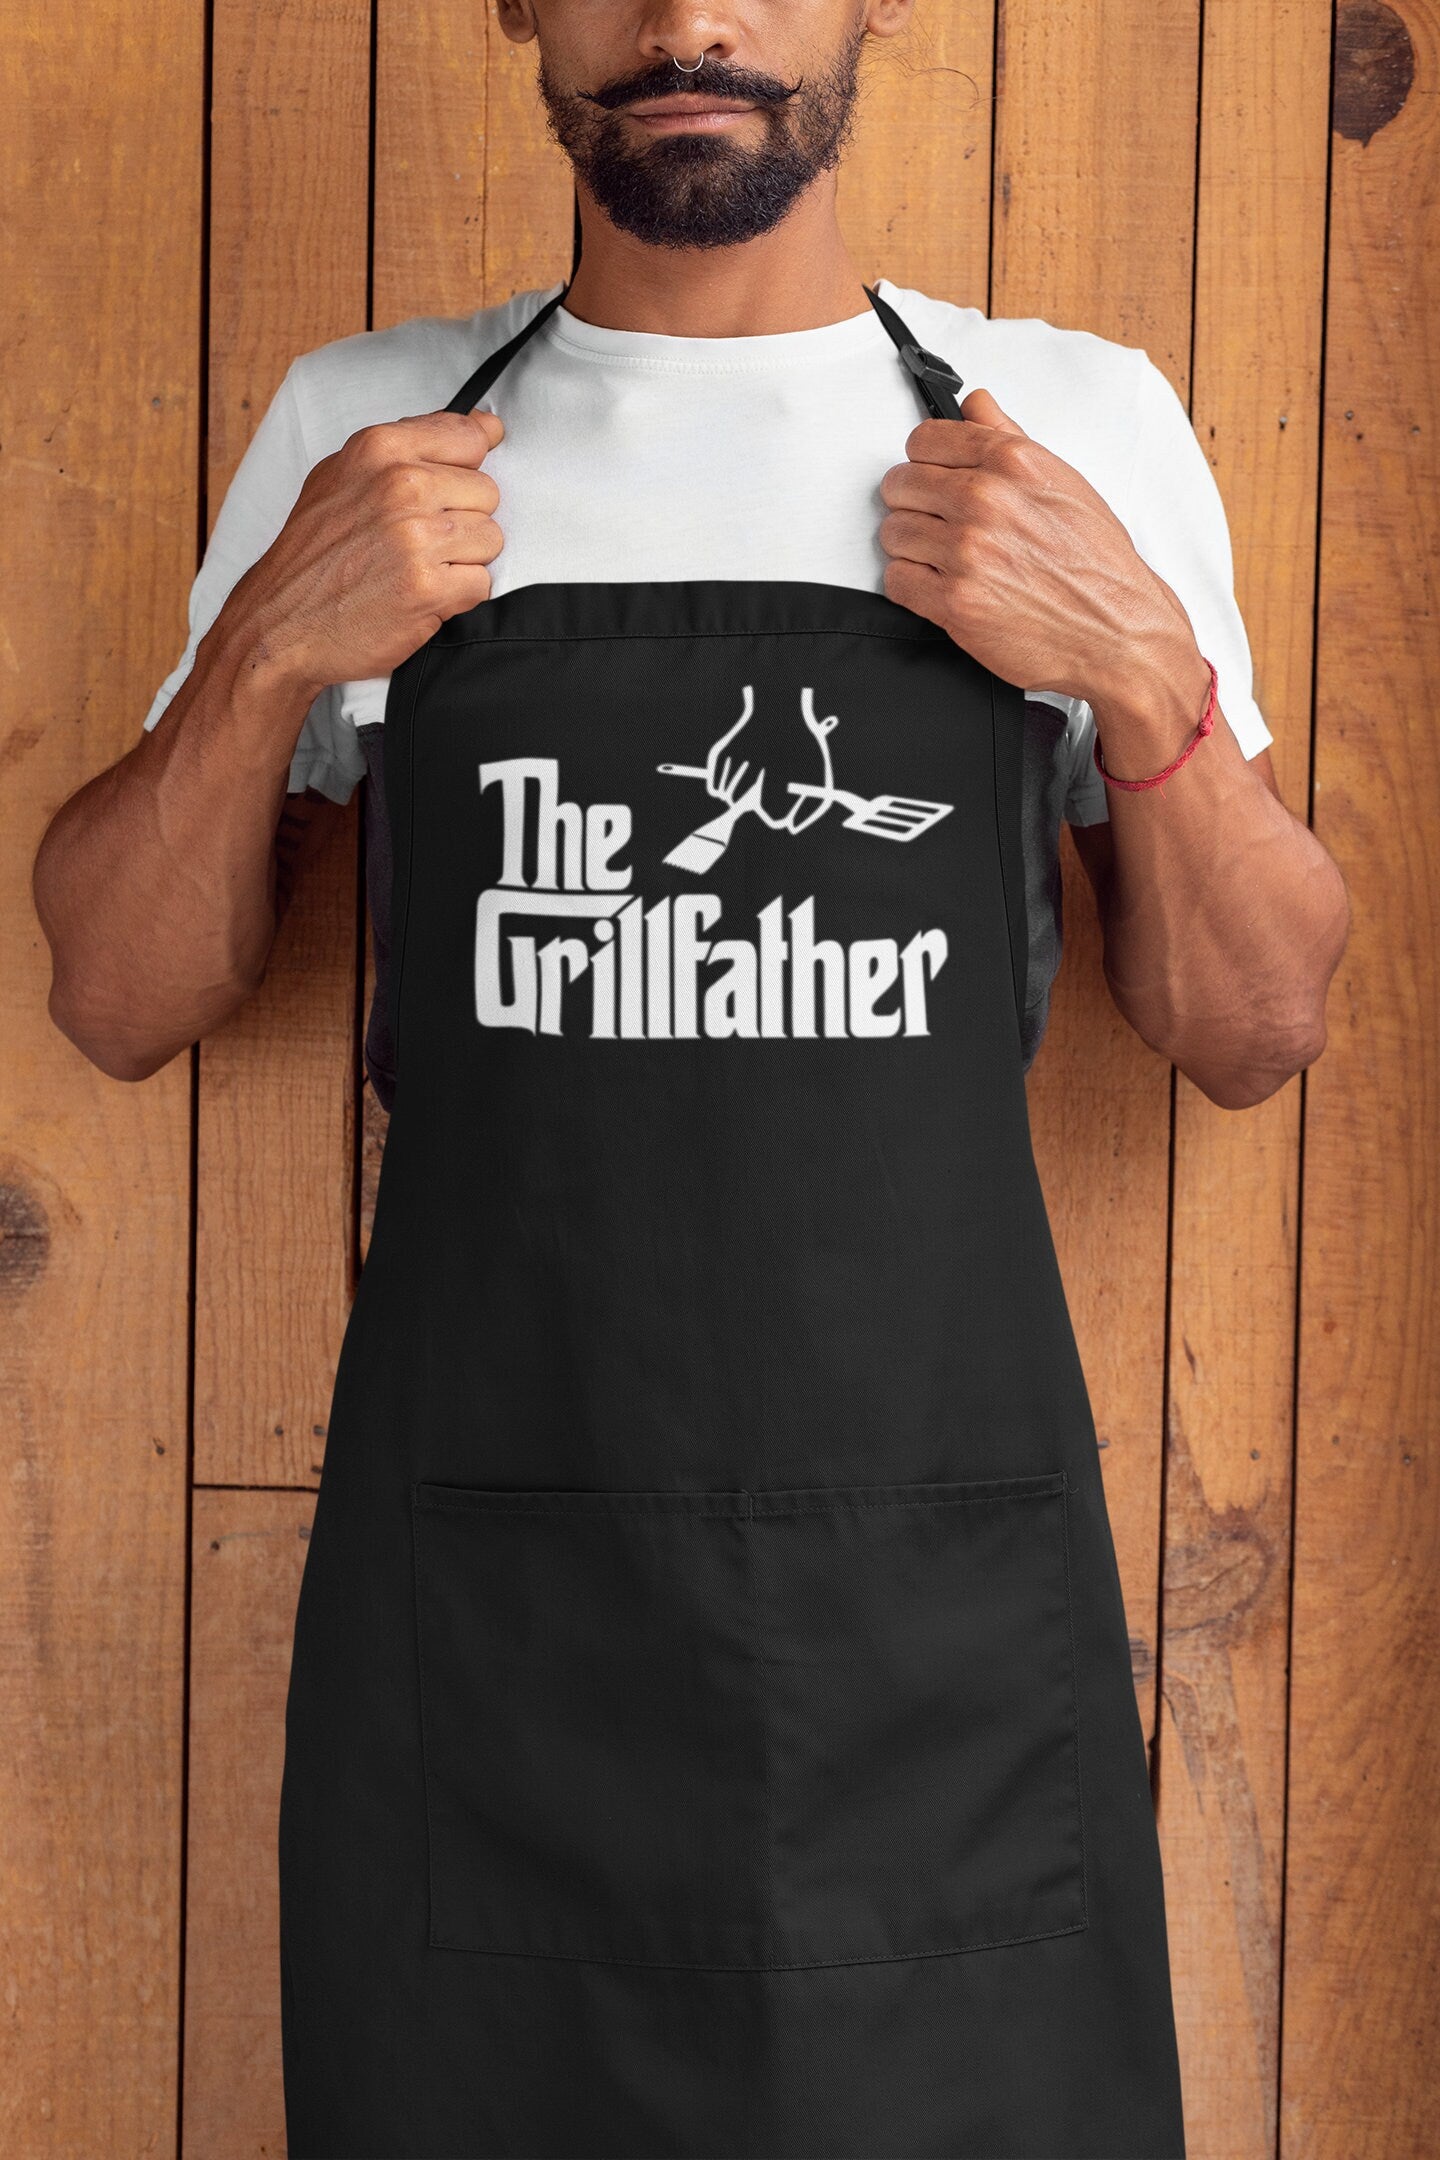 The GrillFather Adult Apron, King Of the Barbequ, King of BBQ Apron, Baking Apron, Apron for Chef, Grilling Apron, Custom Apron